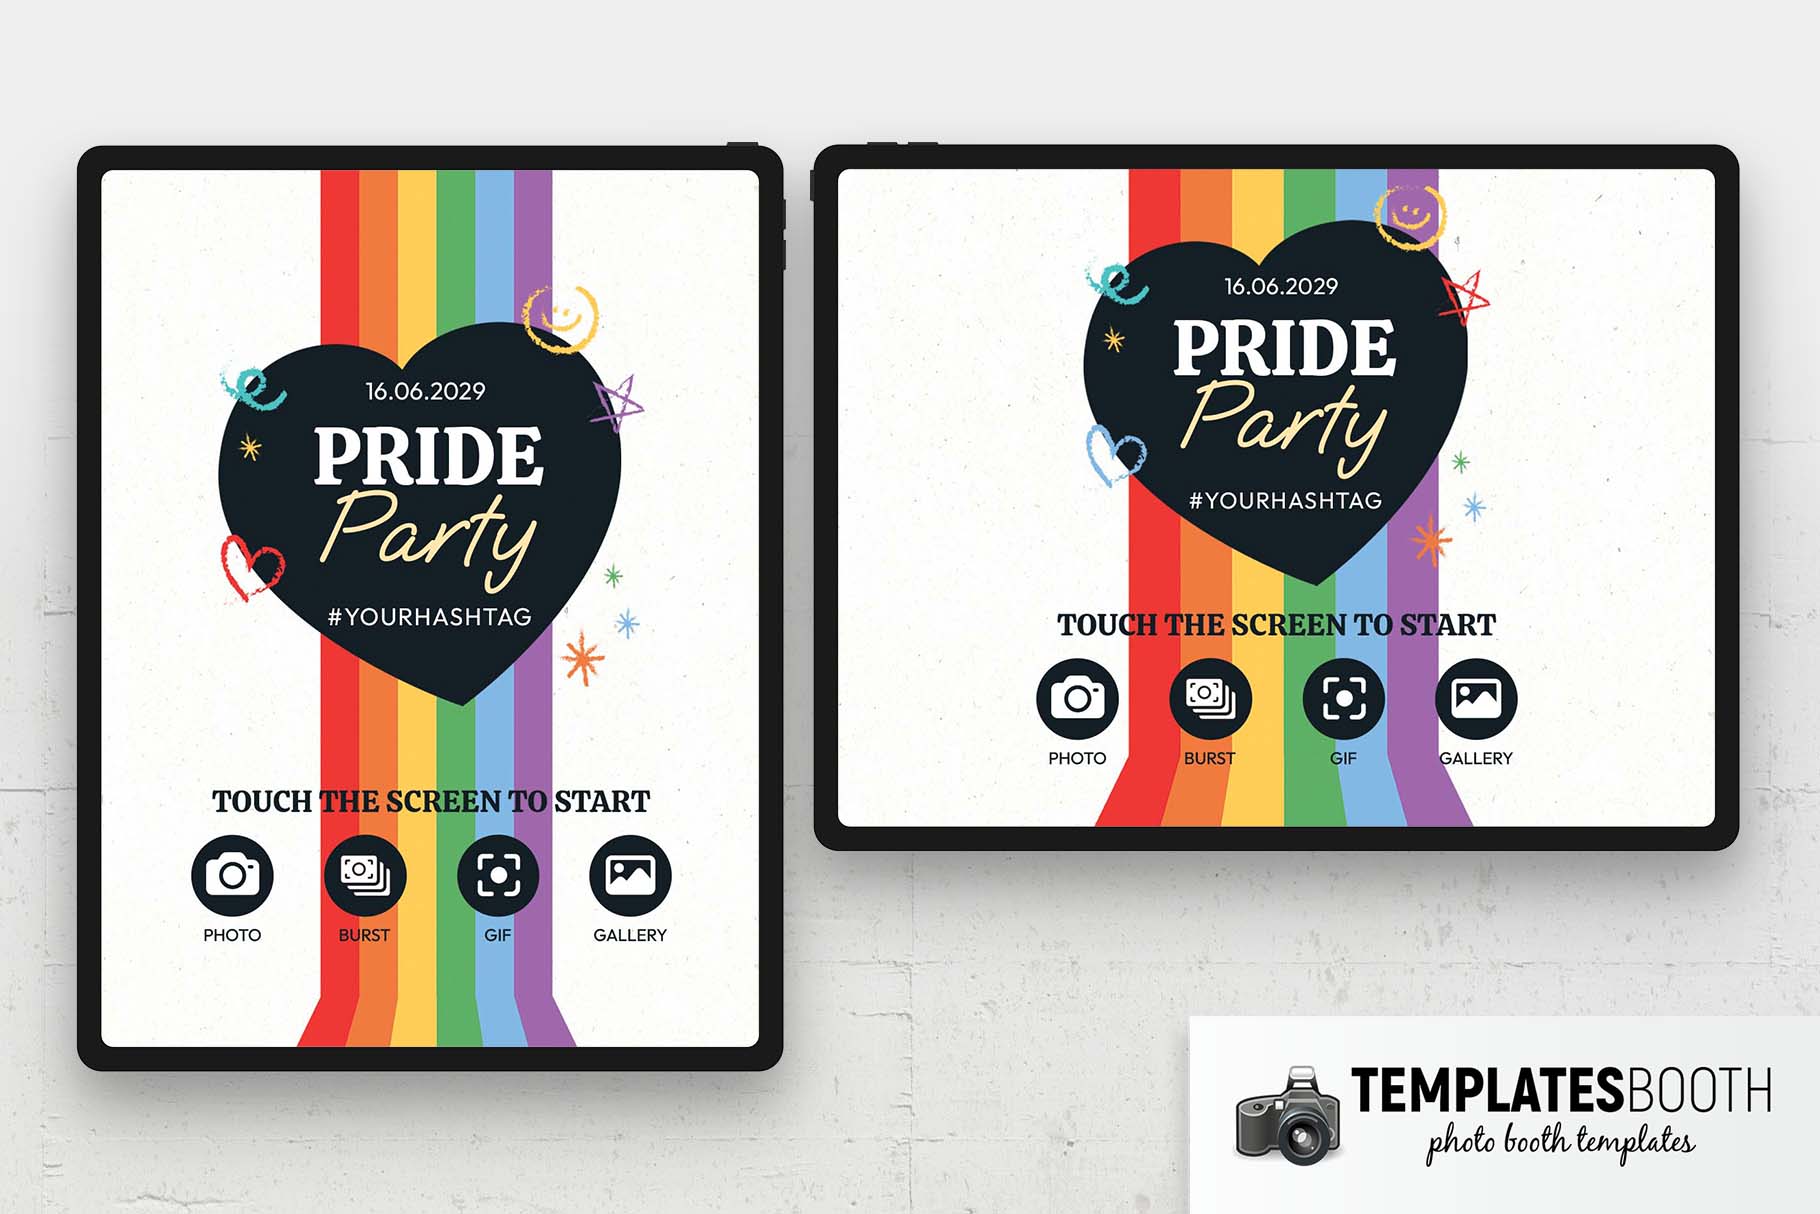 LGBT Pride Party Photo Booth Welcome Screen